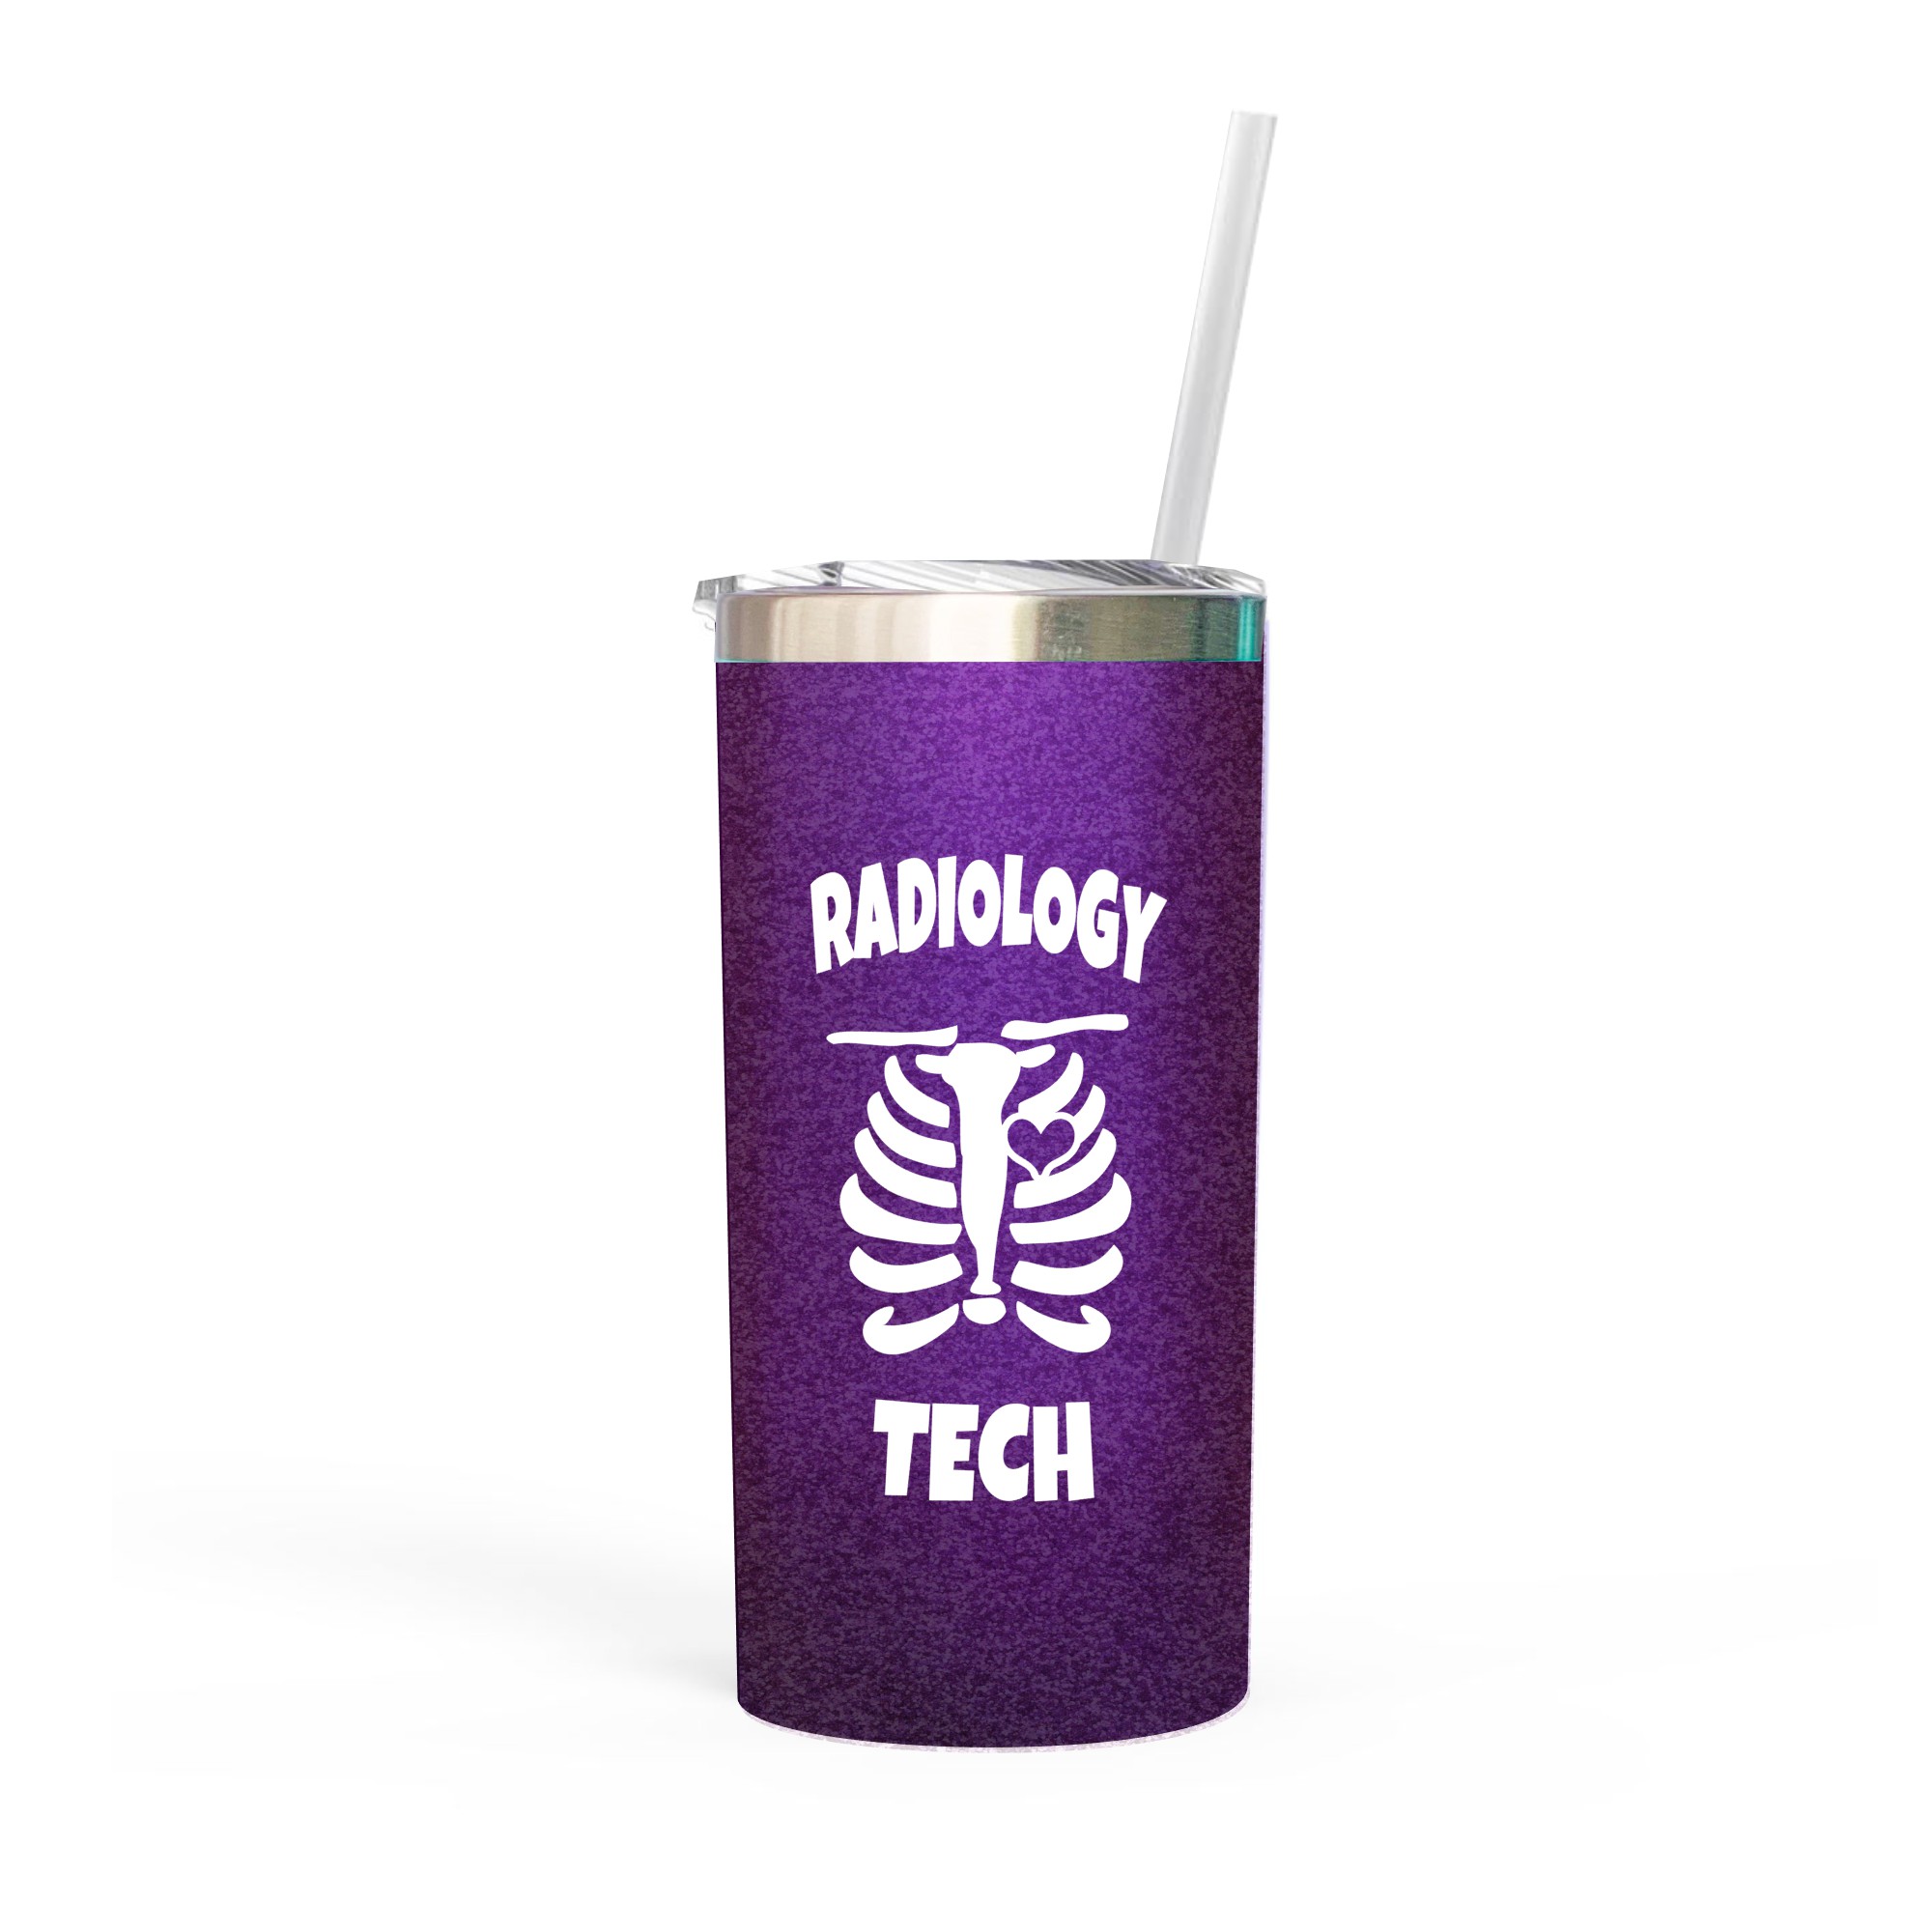 Radiology tech week gifts, Rad tech gifts for women tumbler with straw